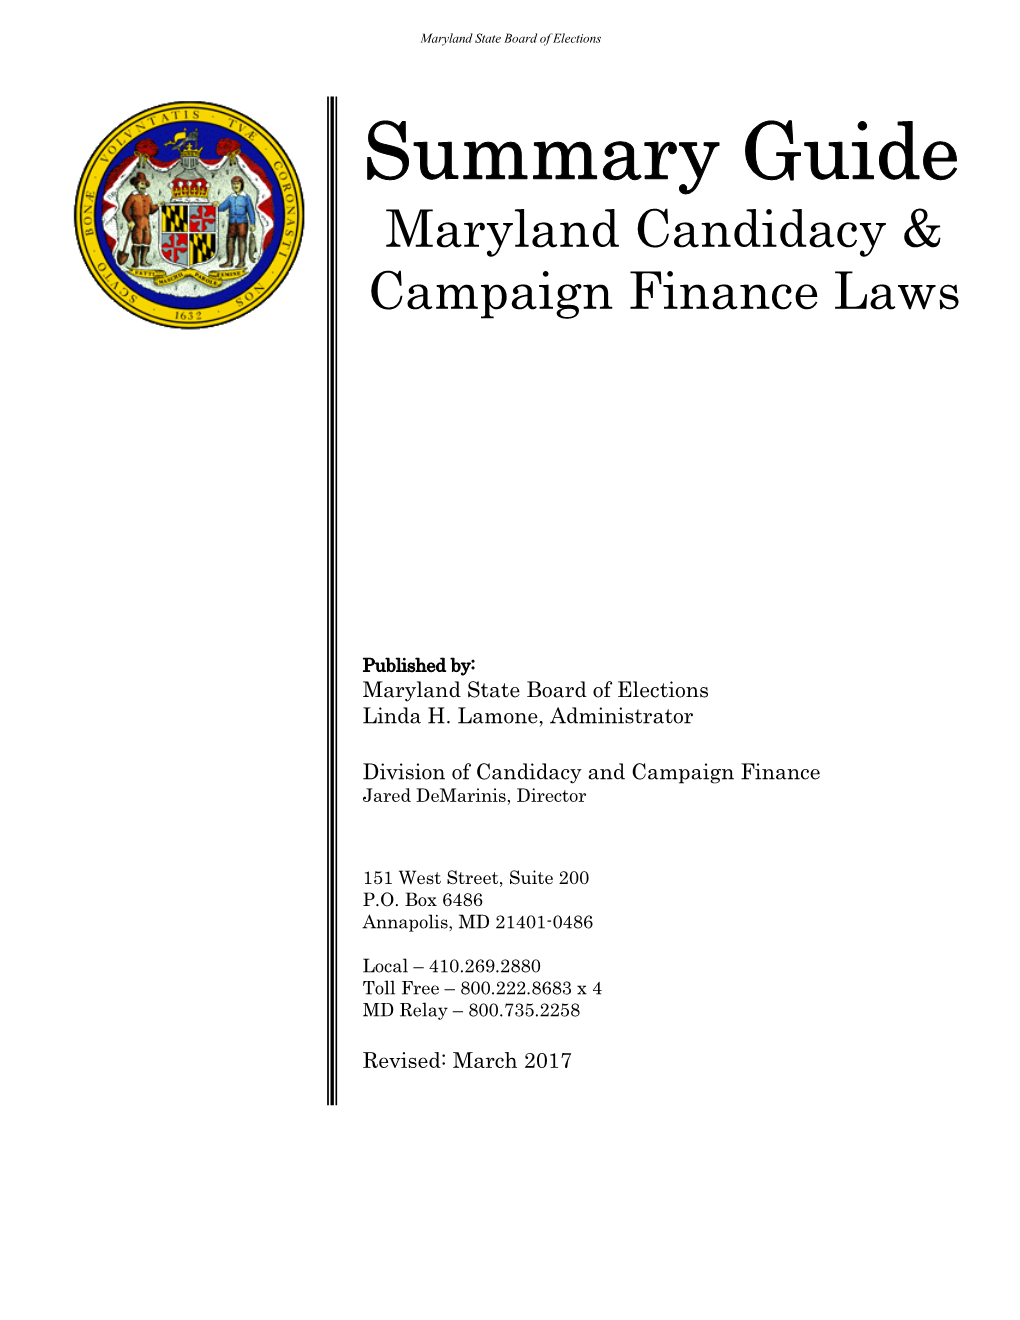 Summary Guide, Maryland Candidacy & Campaign Finance